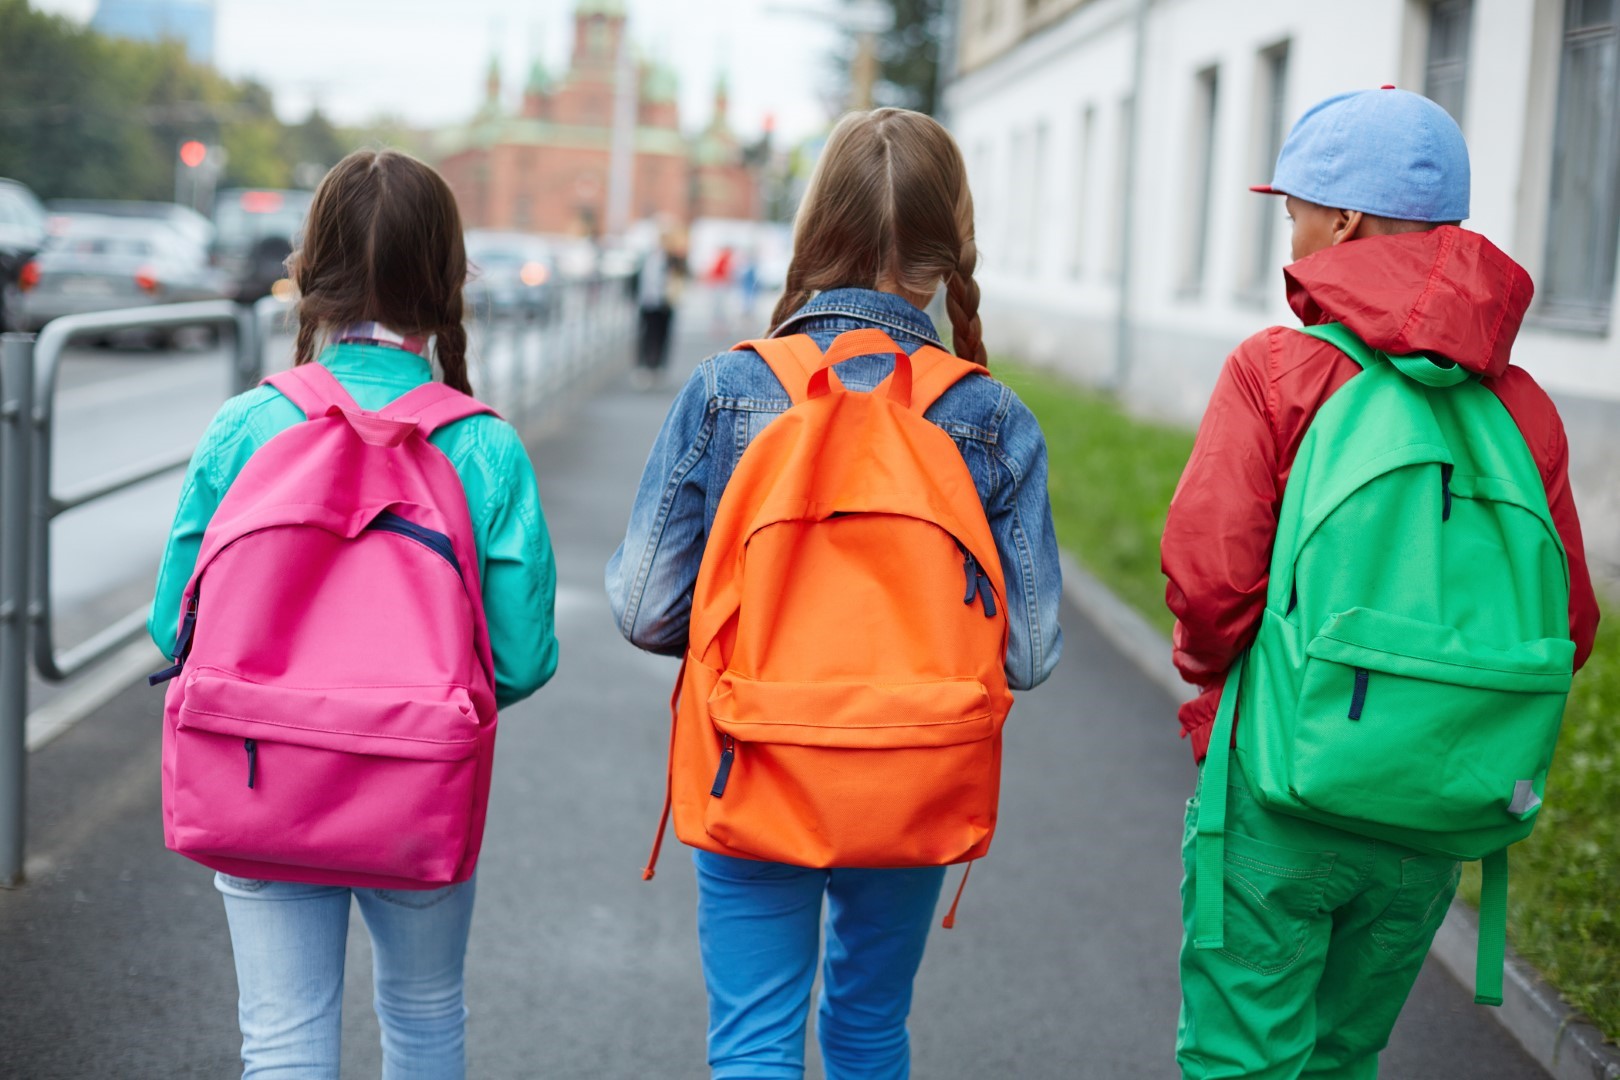 Three children walking carrying brightly coloured backpacks